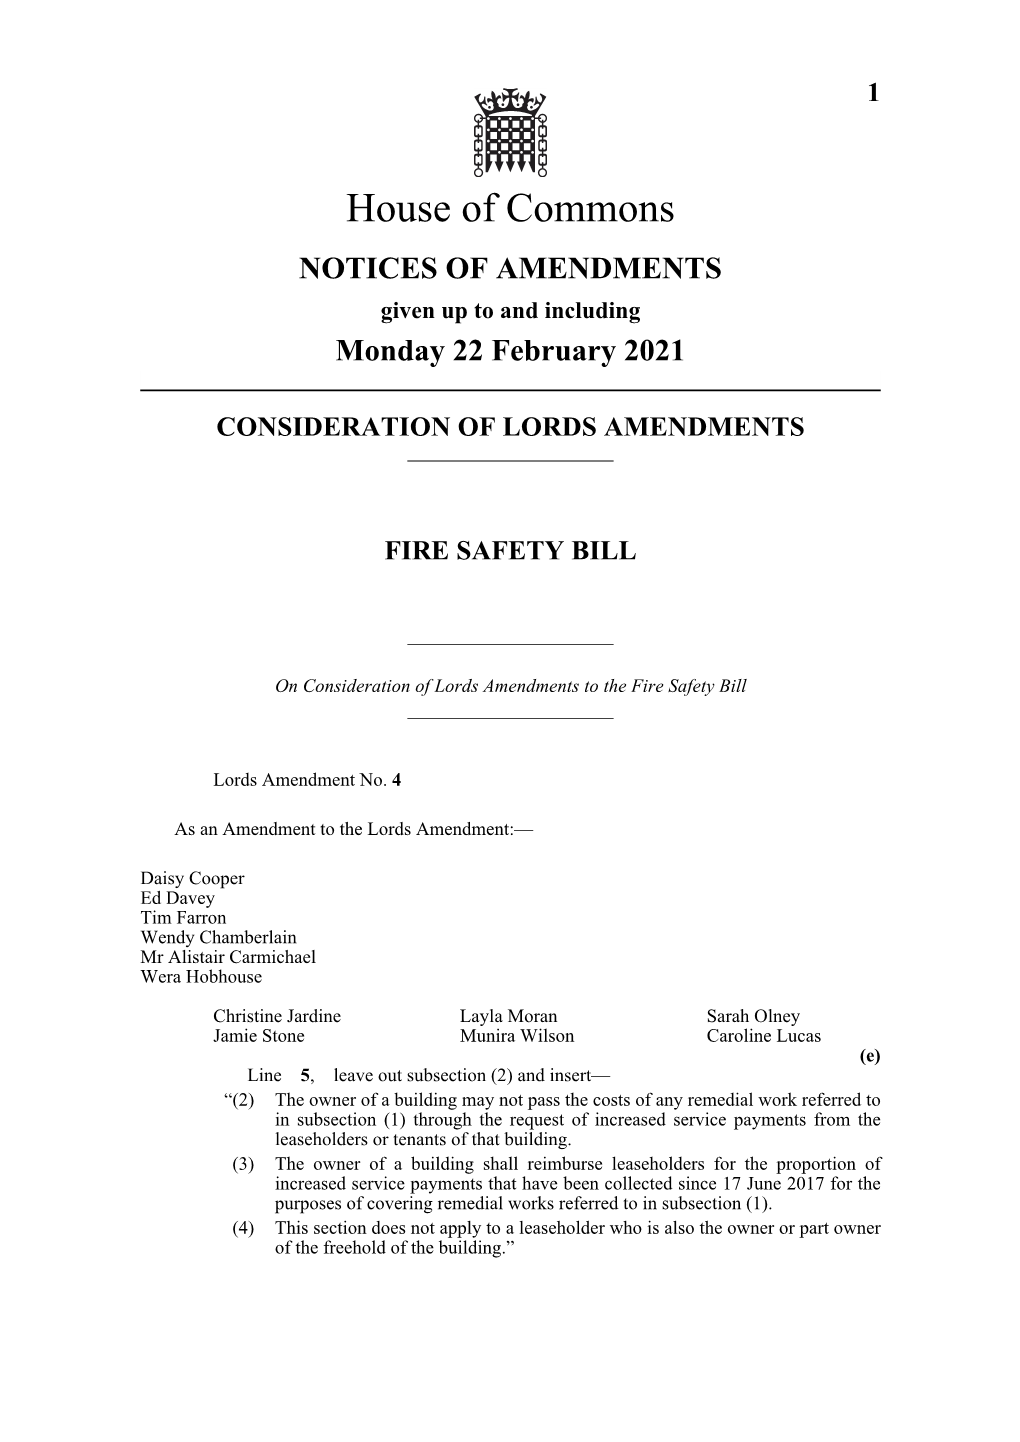 House of Commons NOTICES of AMENDMENTS Given up to and Including Monday 22 February 2021